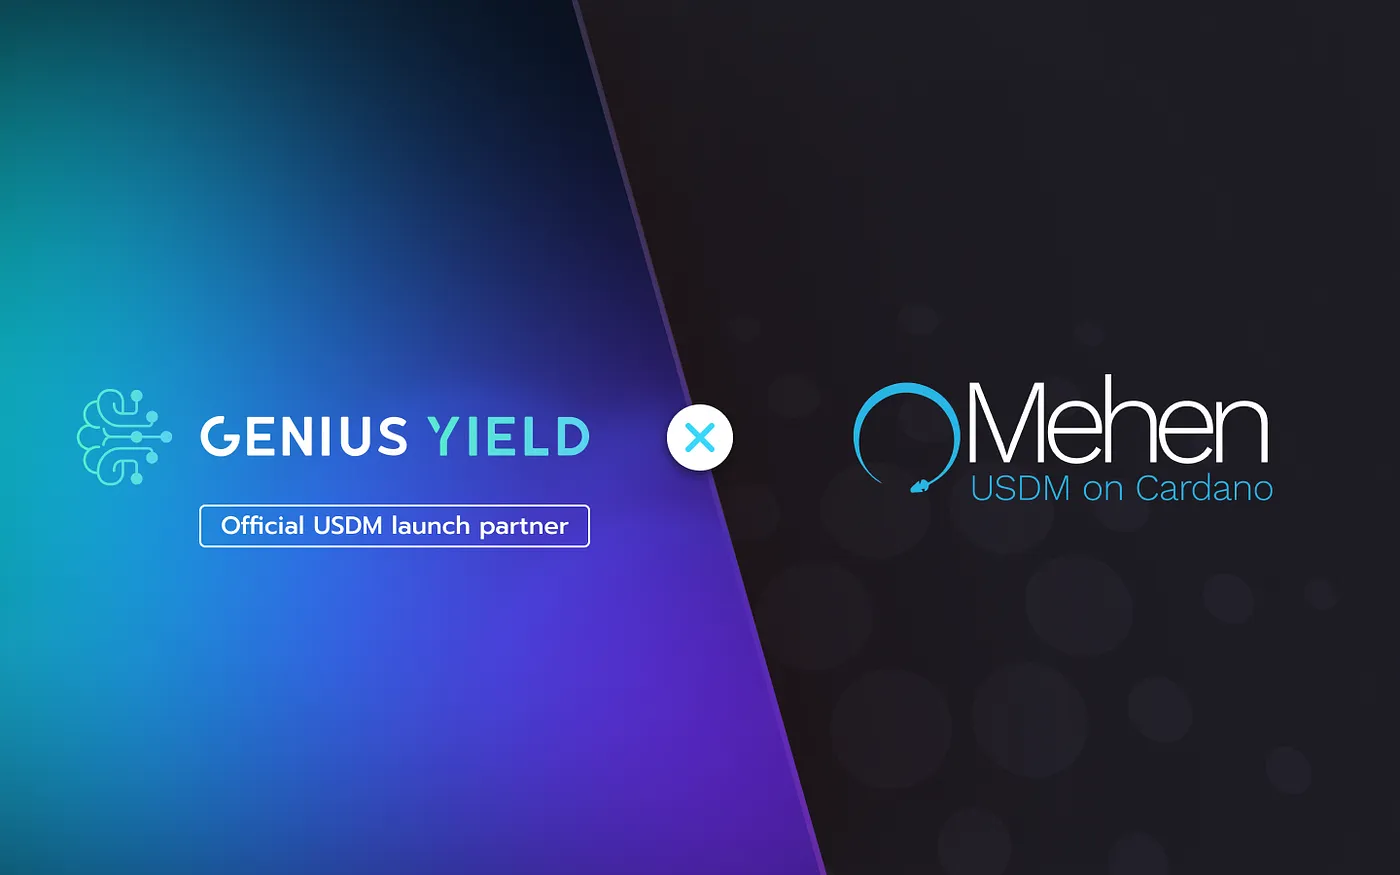 Genius Yield becomes an official USDM launch partner